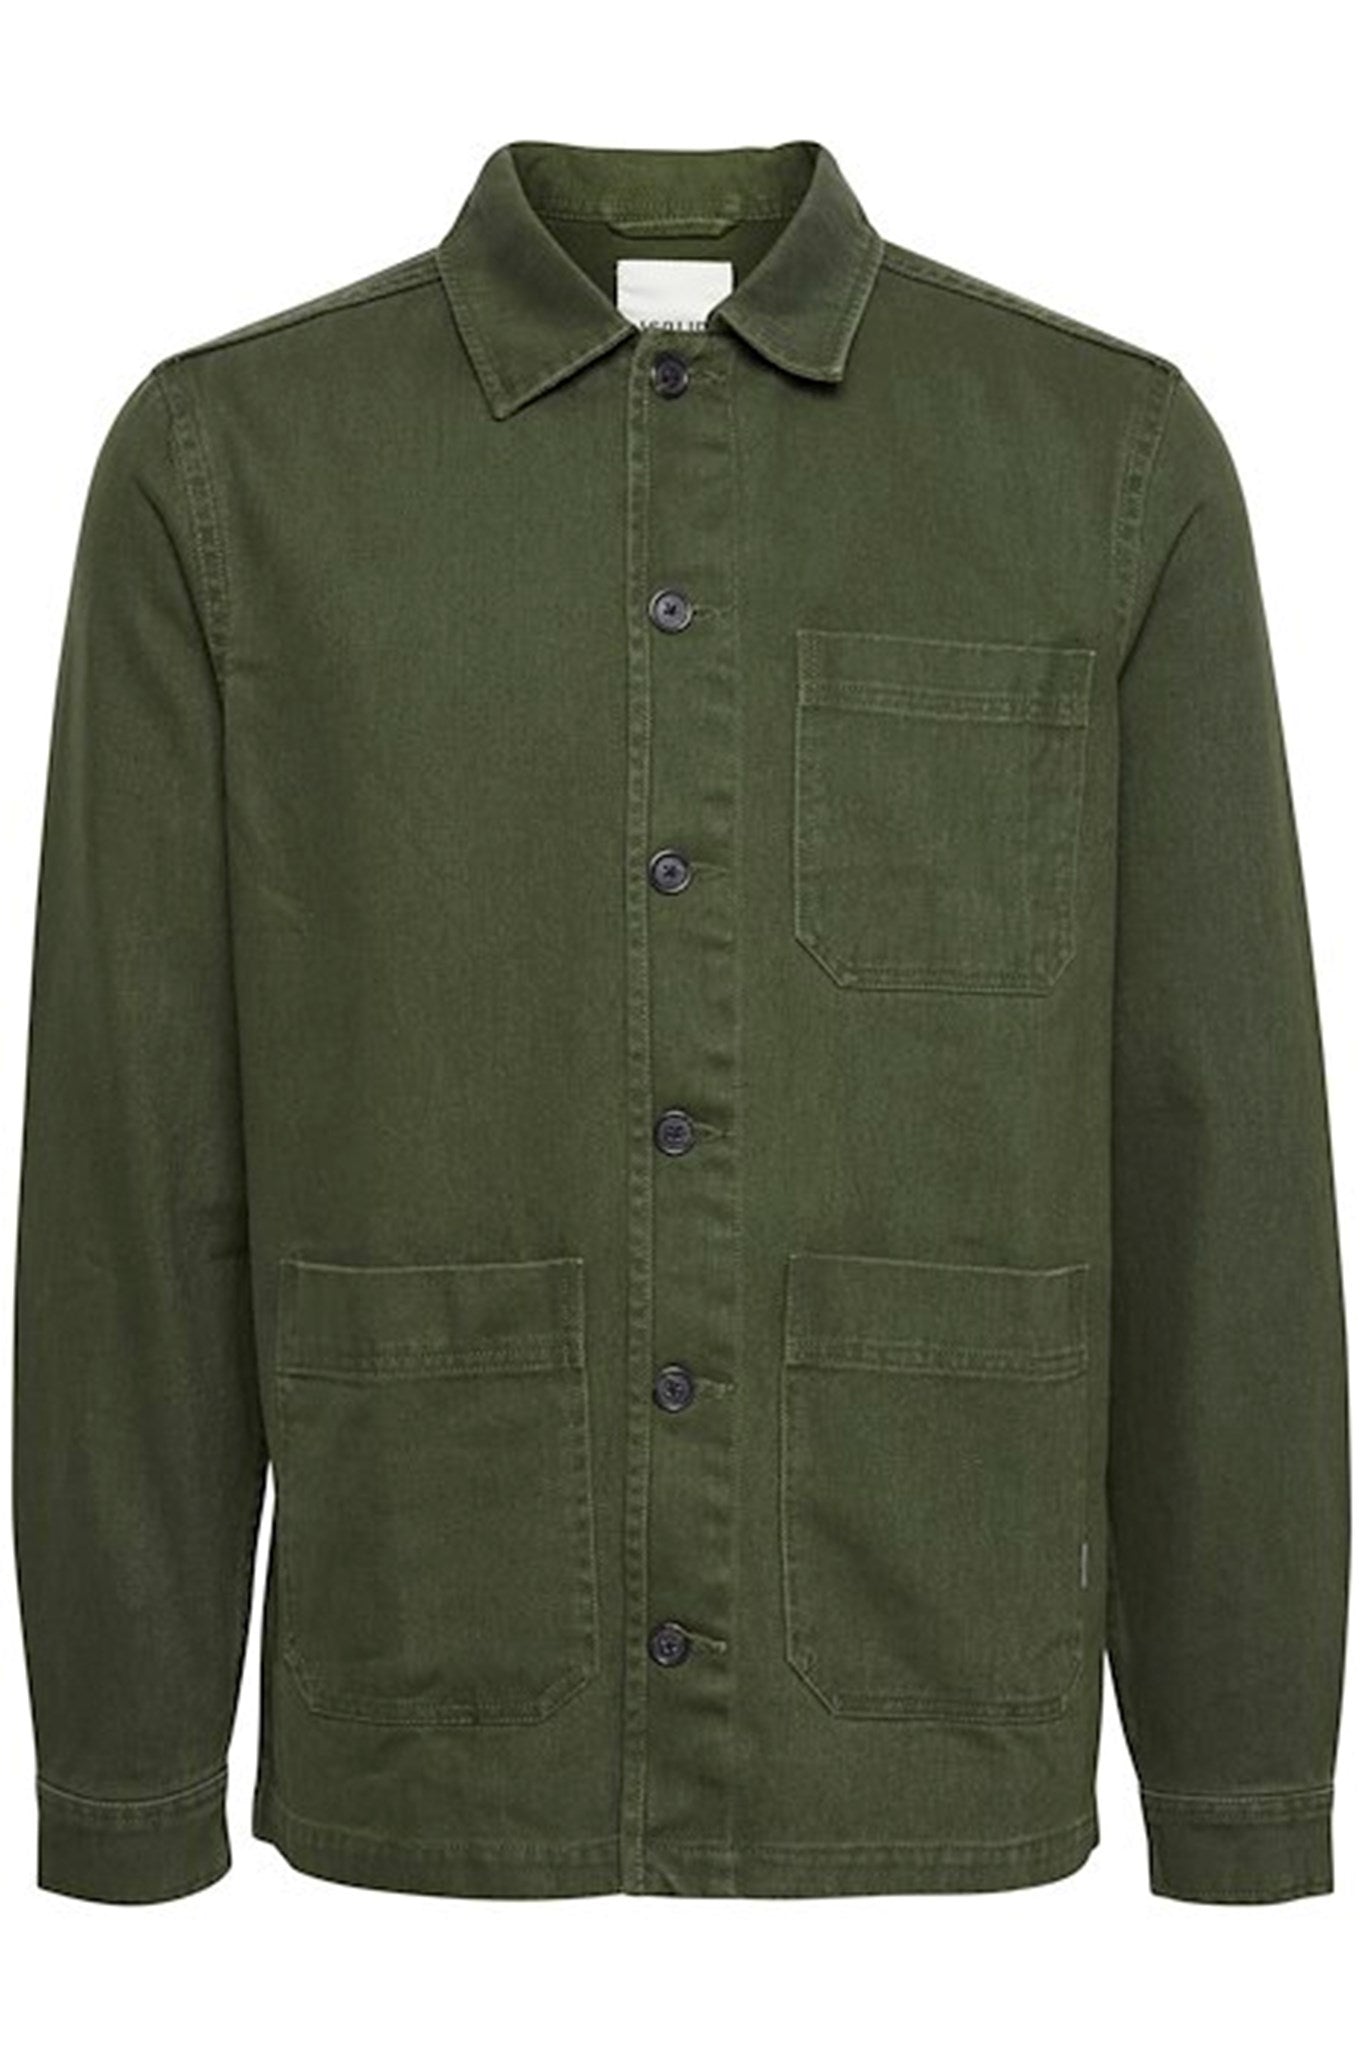 Wand Overshirt - Black Forest - Solid - Green